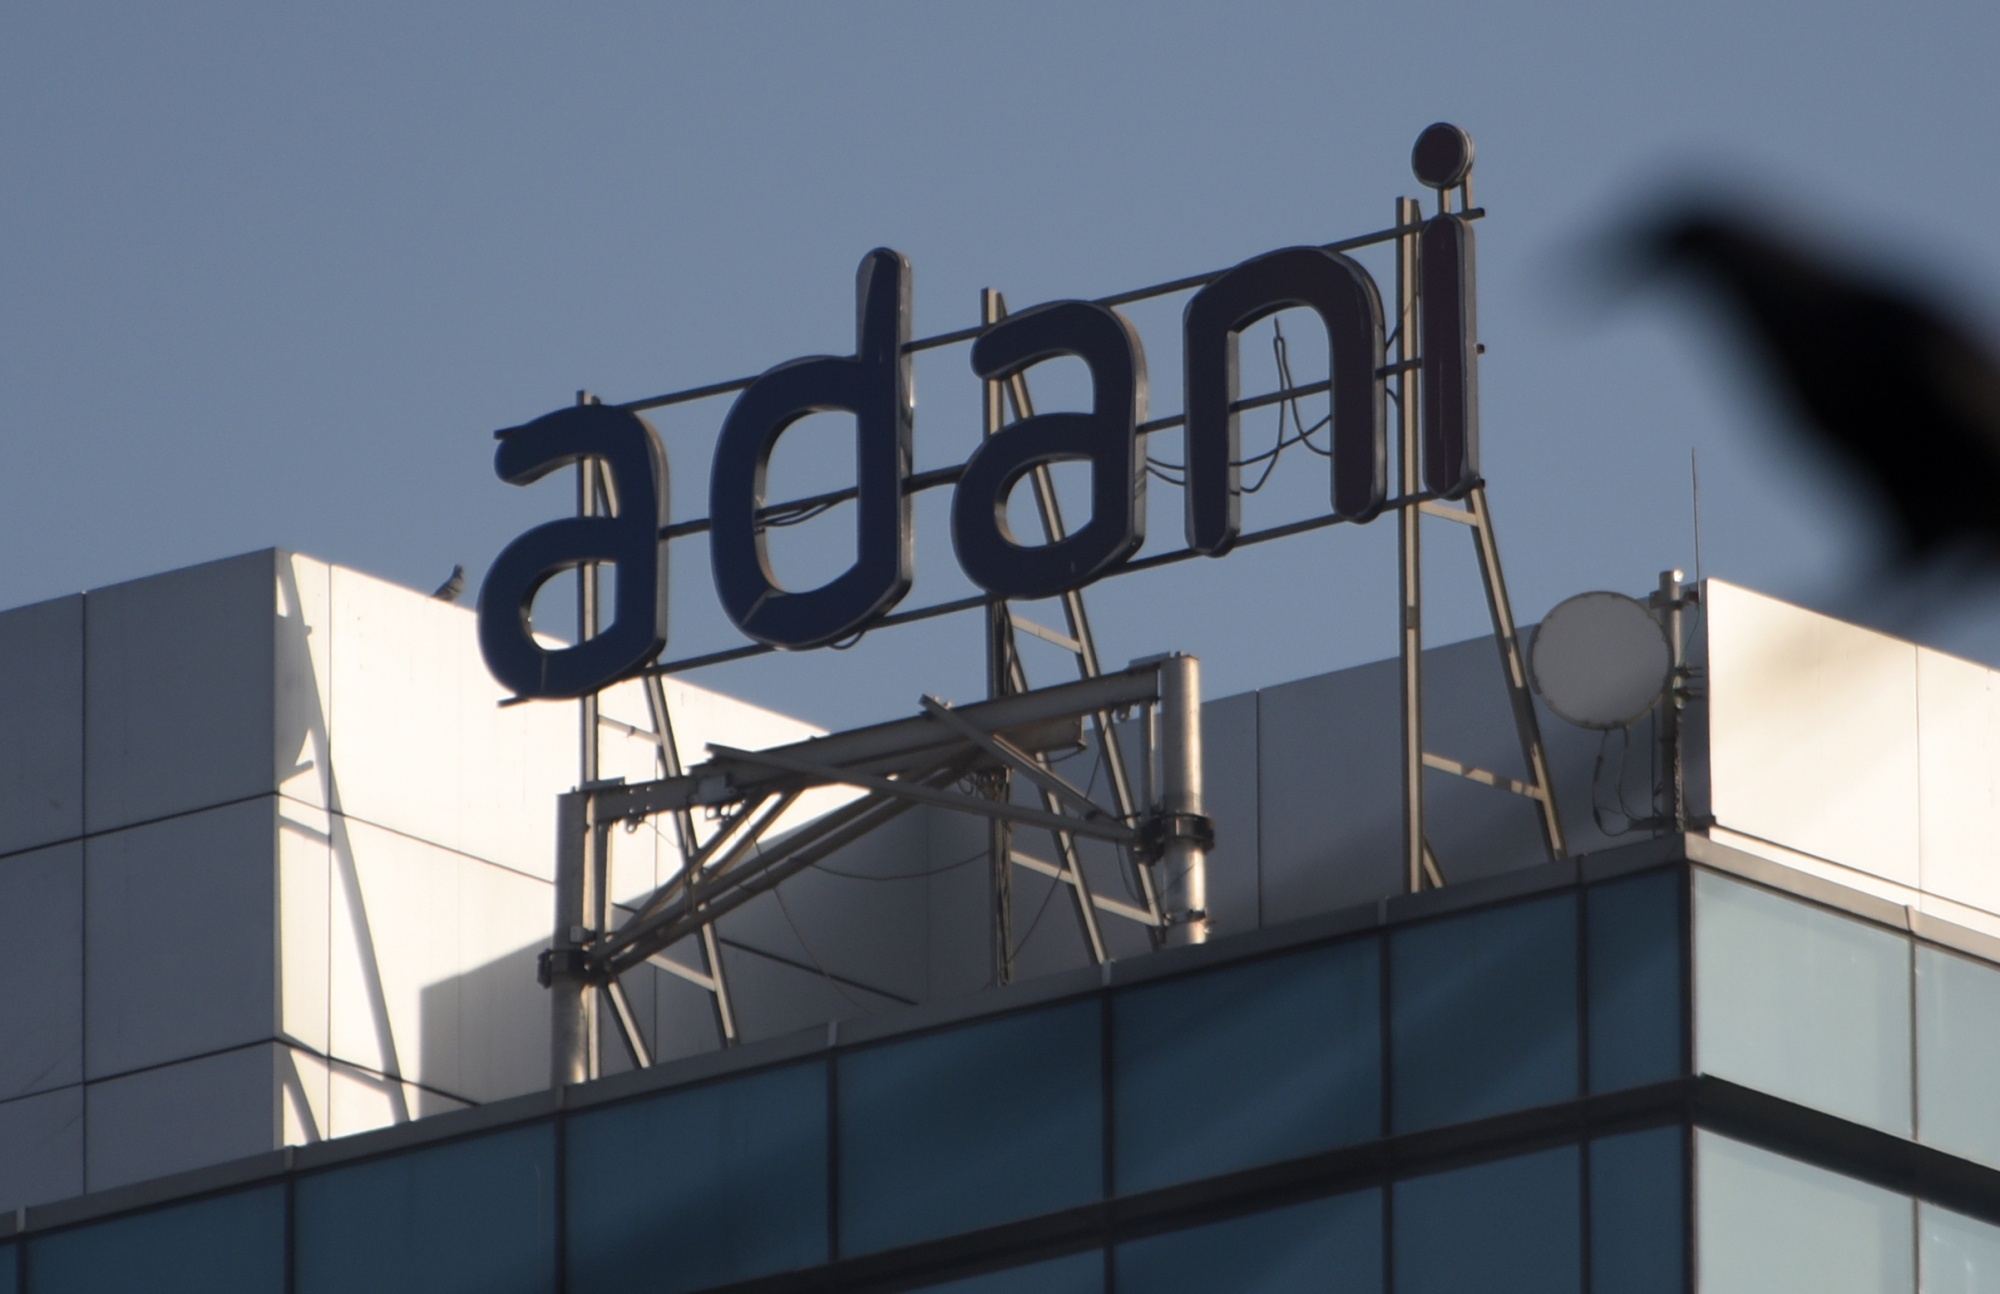 Sebi Says It Has Tightened Beneficial Ownership Rules as Adani Hearing  Resumes  Bloomberg